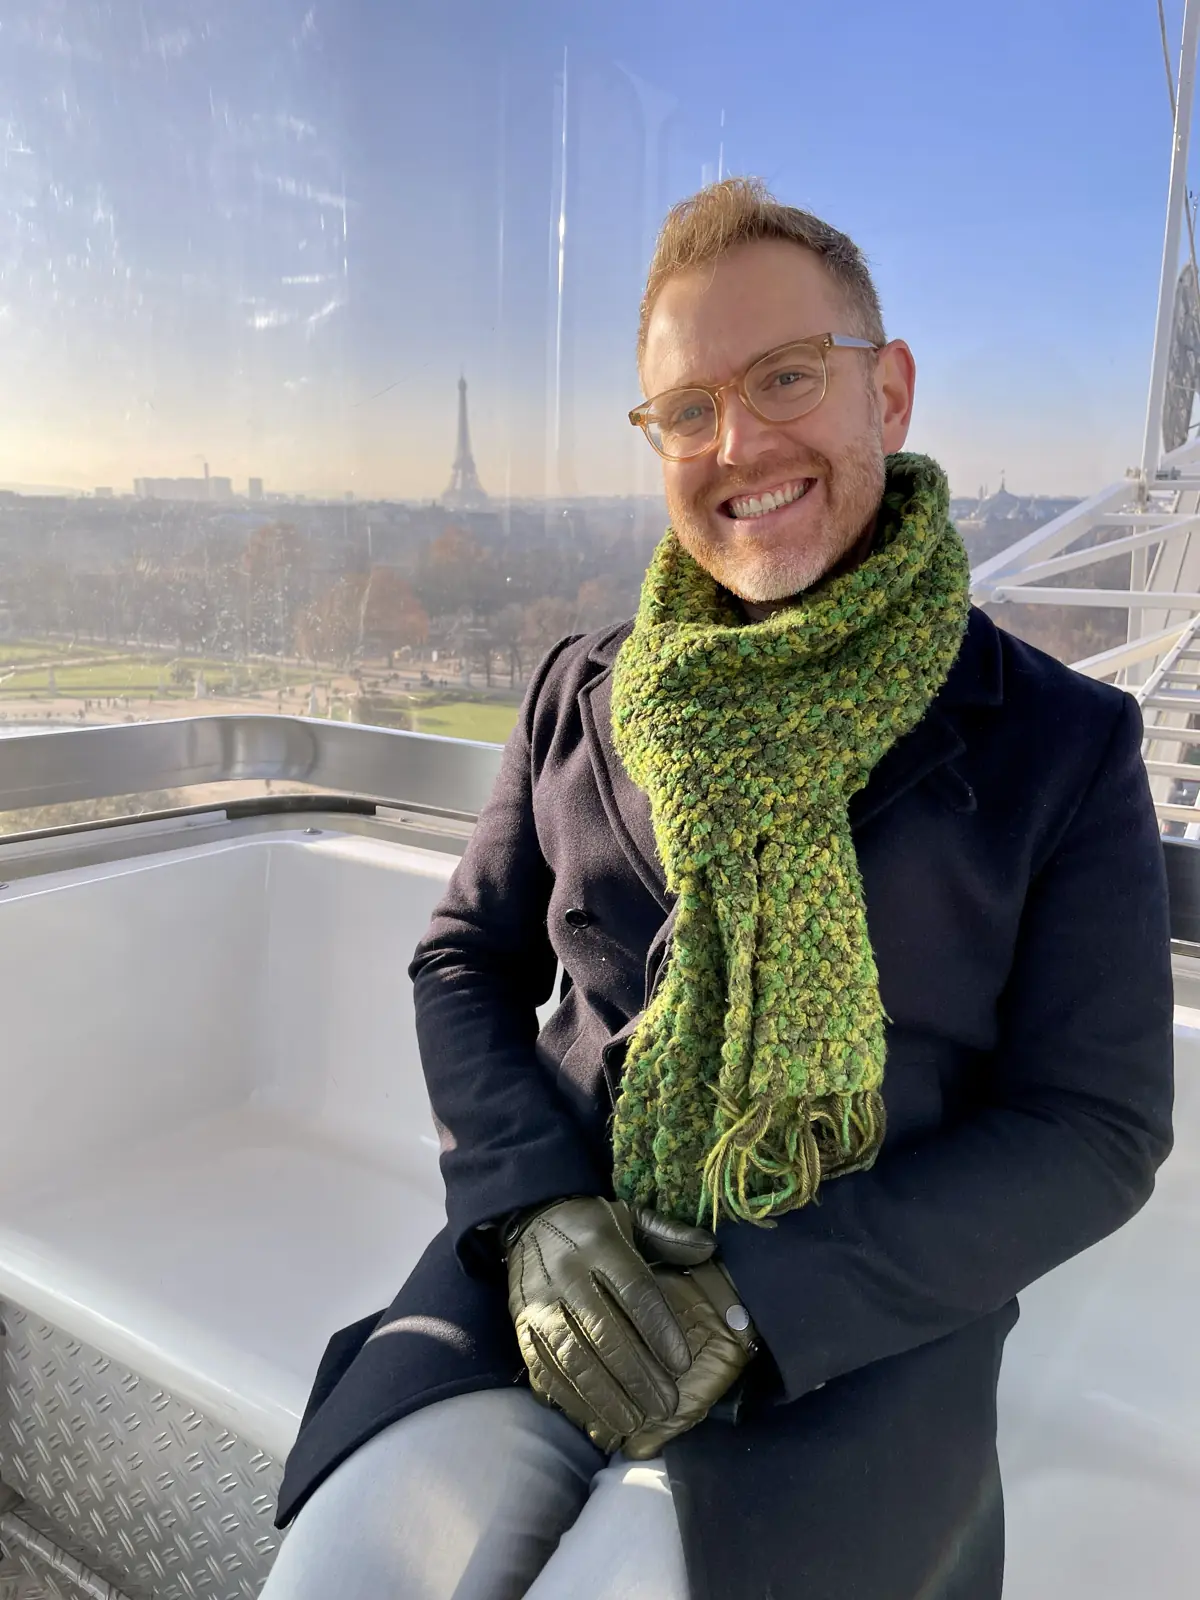 Arthur smiling in the The Roue de Paris with the Eiffel Tower in the background